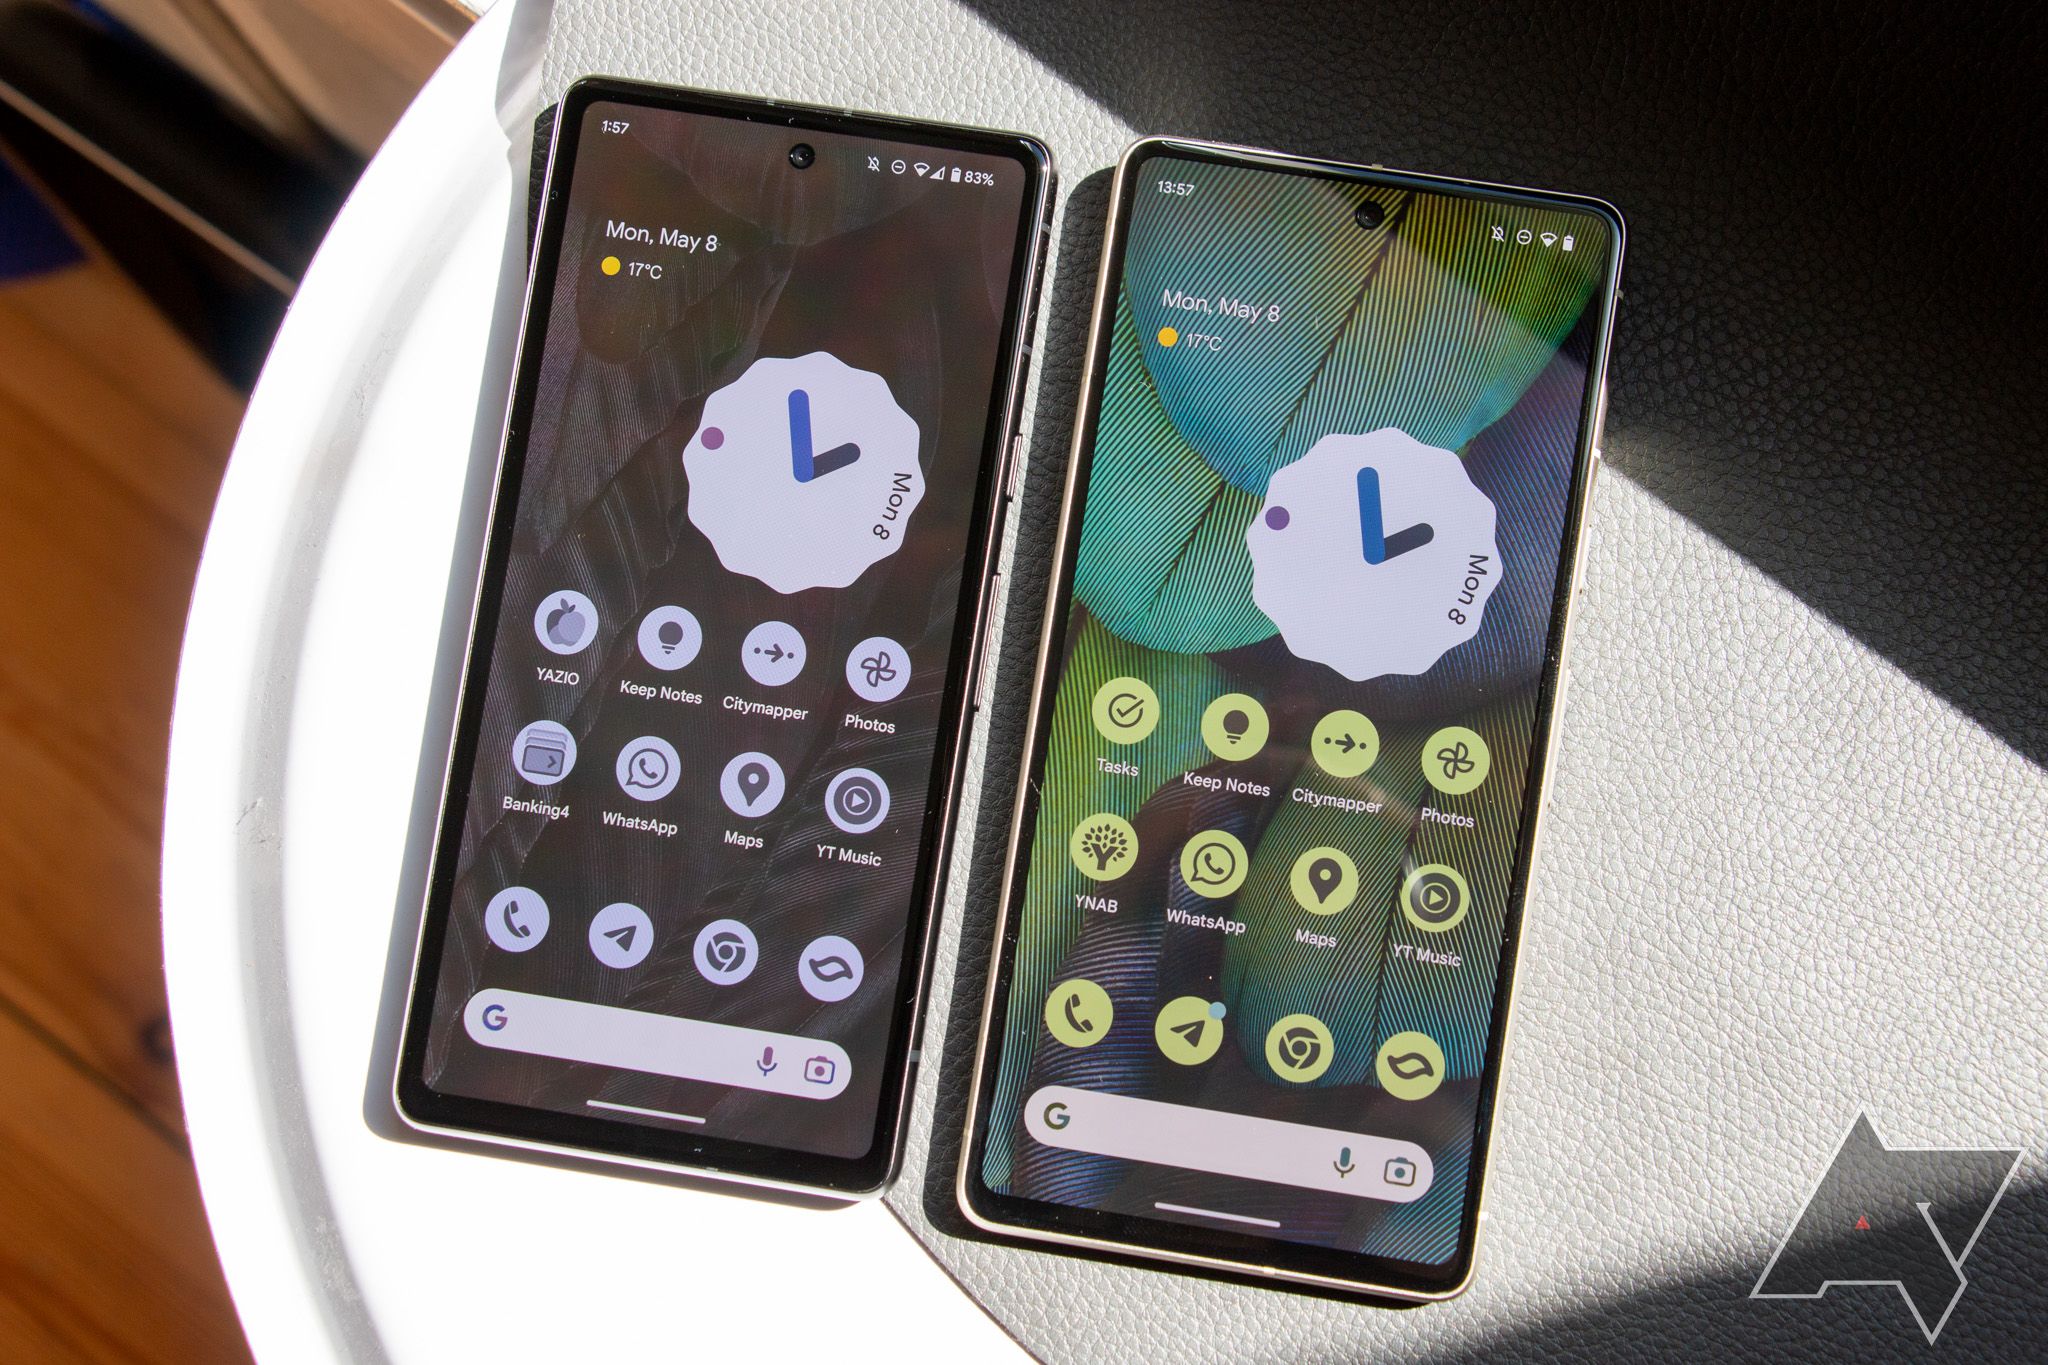 The Google Pixel 7a and Pixel 7 next to each other, both showing the home screen with themed icons